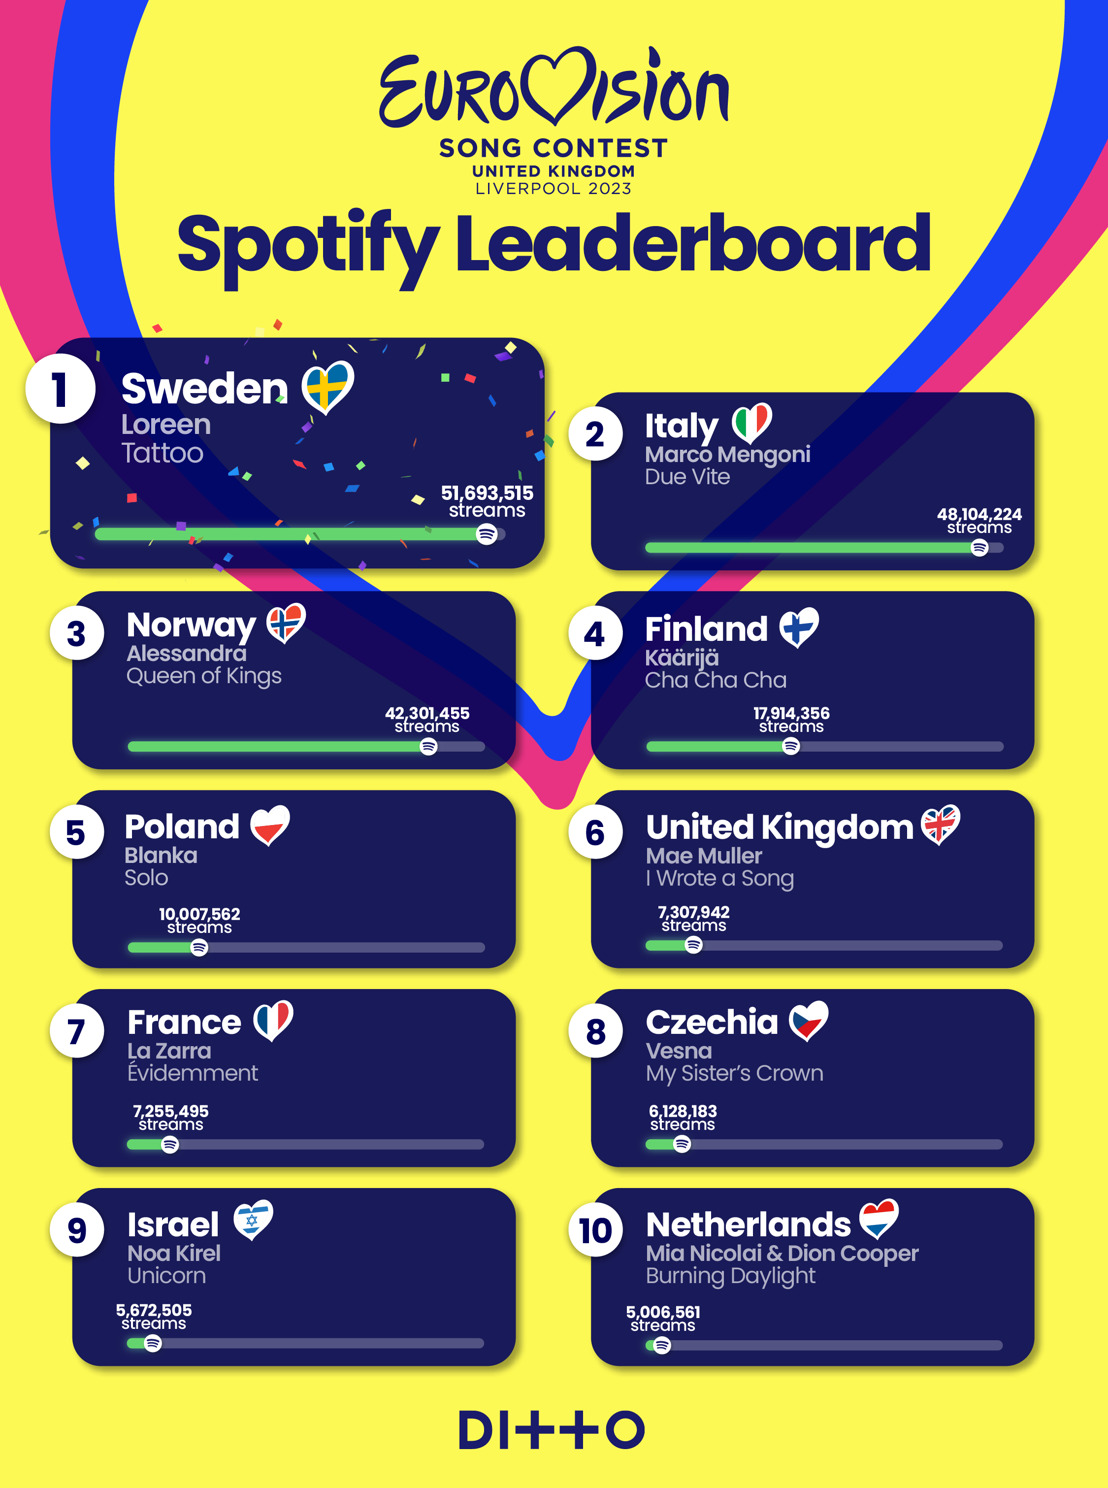 Sweden will win Eurovision Song Contest 2023 (and UK finish 6th) according to Spotify streams